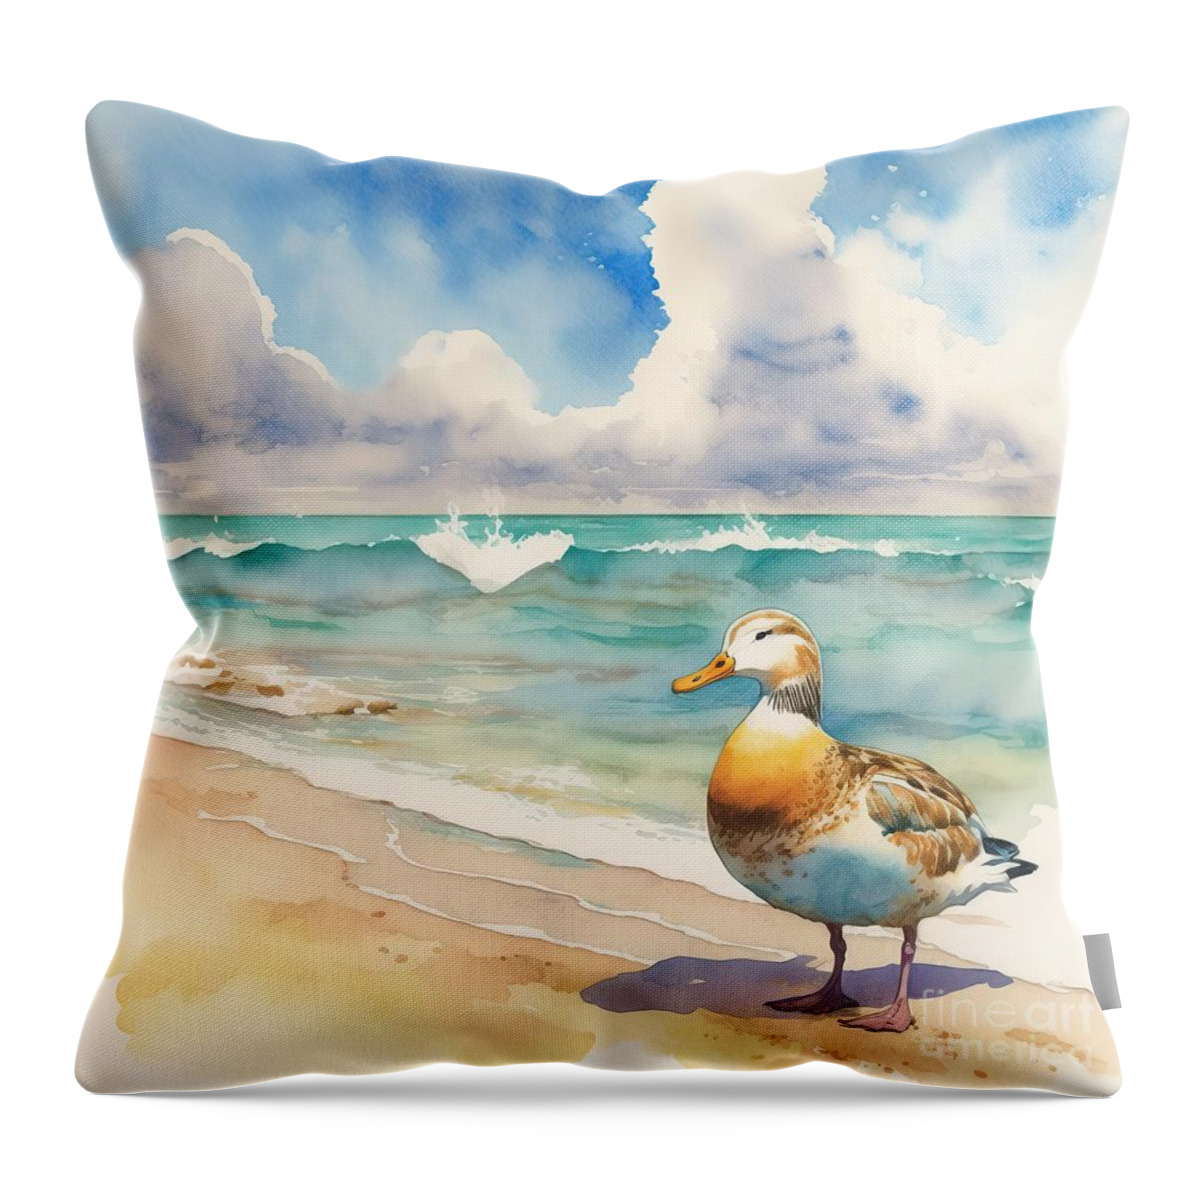 Mythology Throw Pillow featuring the painting Duck At Beach by N Akkash